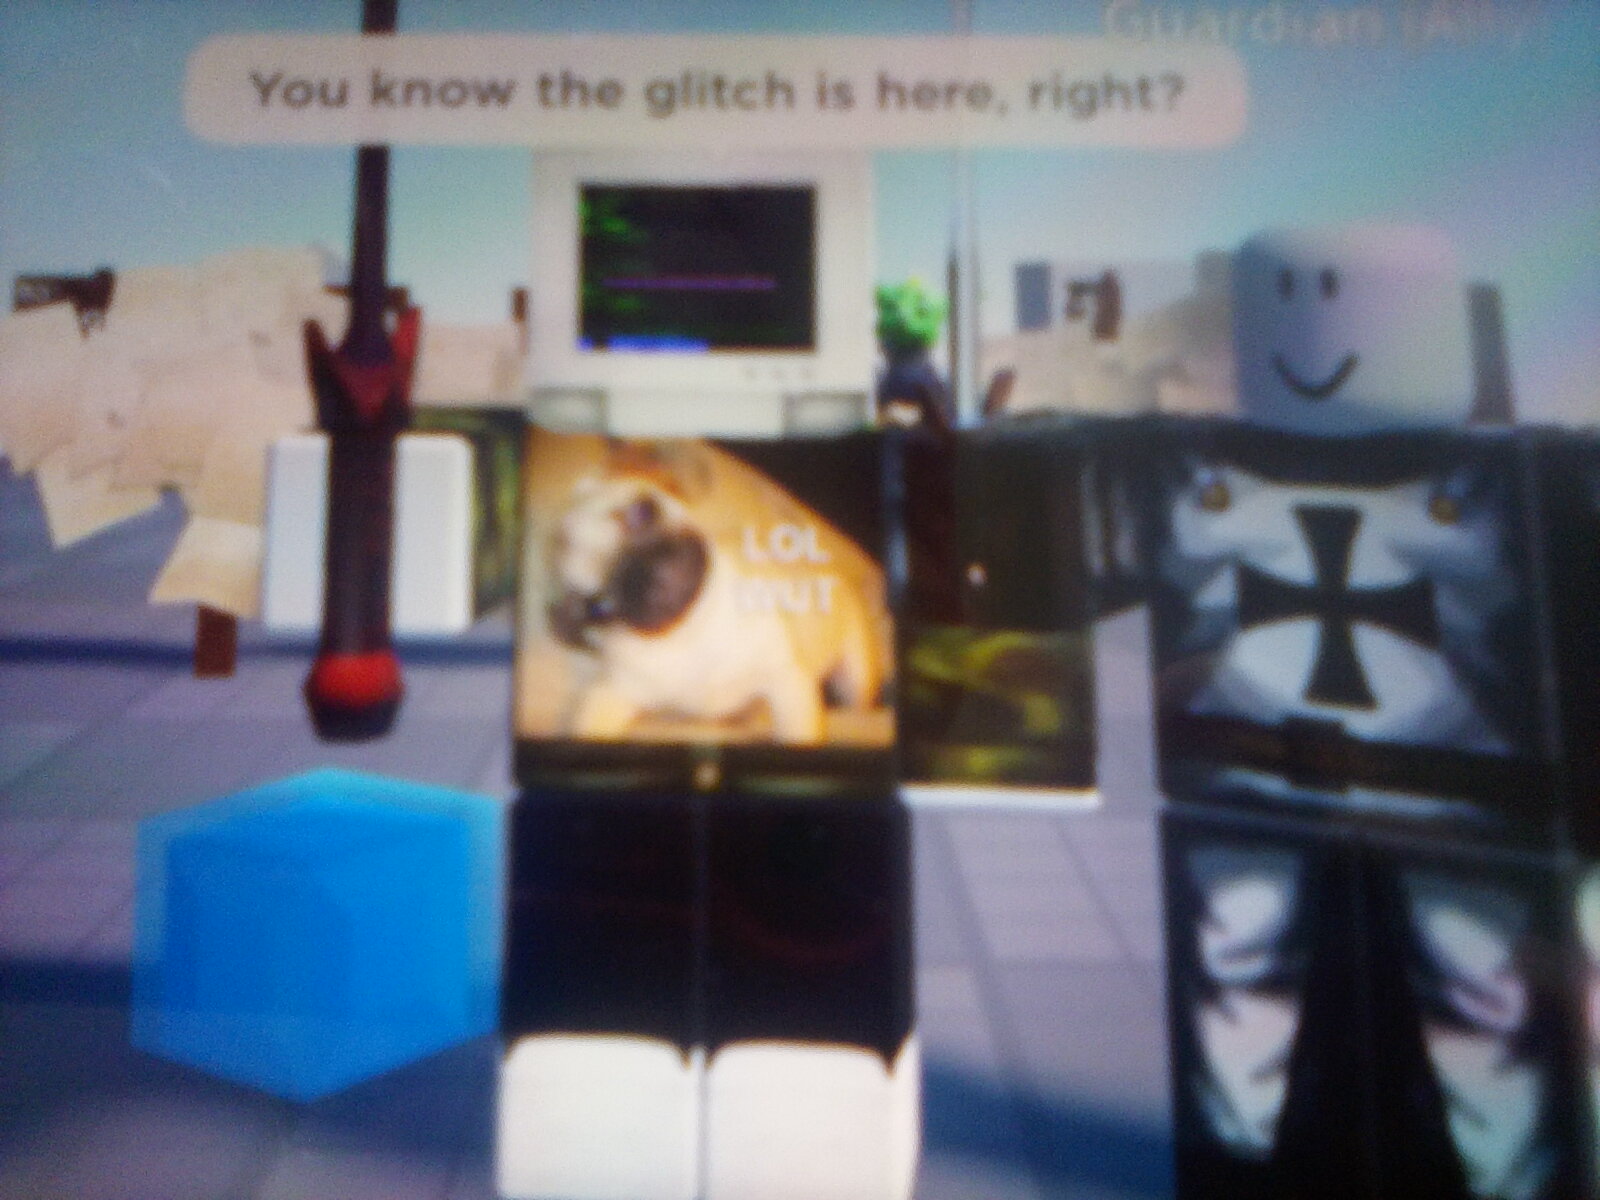 High Quality Pugdogwoof22 "You know the glitch is here, right?" Blank Meme Template